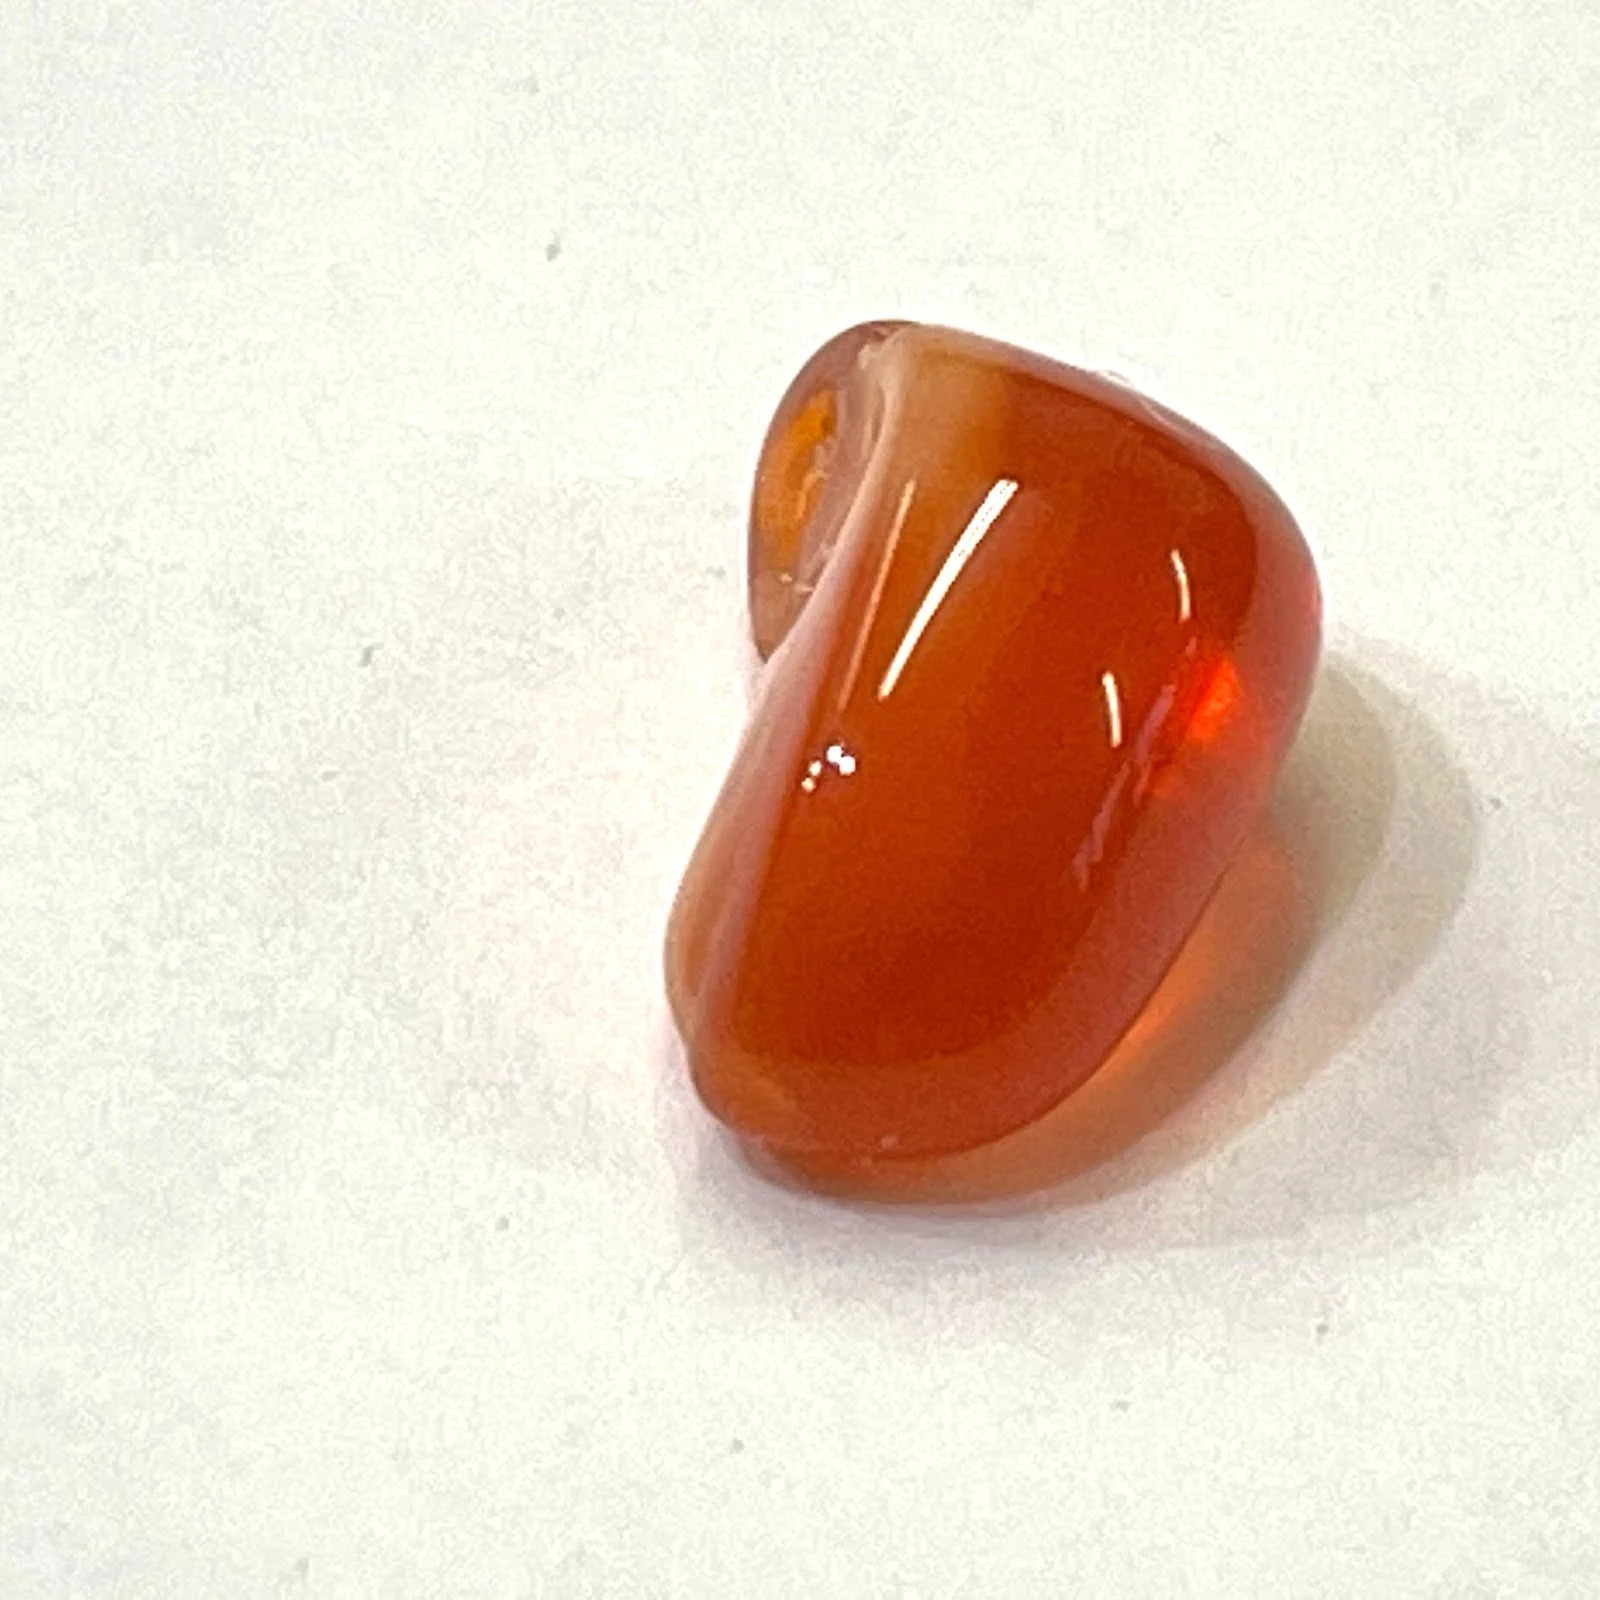 FOPL9 – 1.25 ct Fire Opal from Mexico